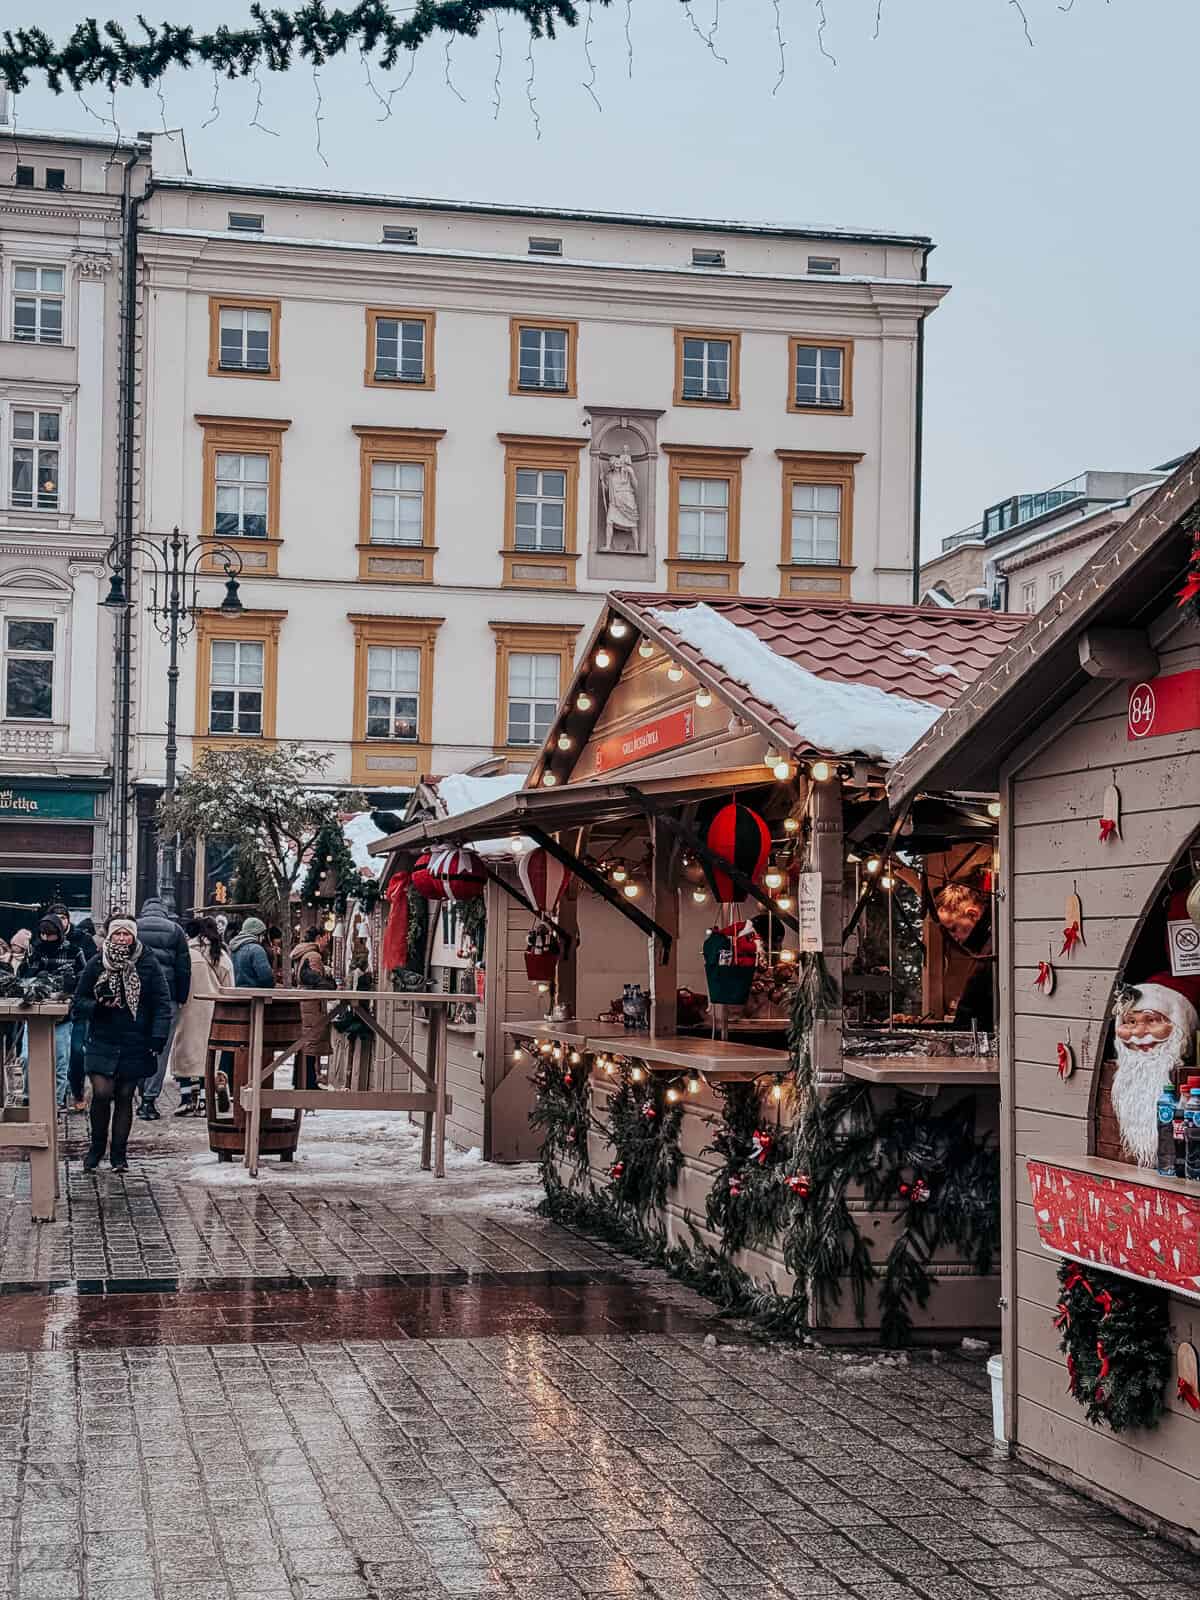 Festive wooden stall richly decorated with Christmas ornaments and lights, offering holiday delicacies under a snowy awning, with busy shoppers in winter attire at a European Christmas market.